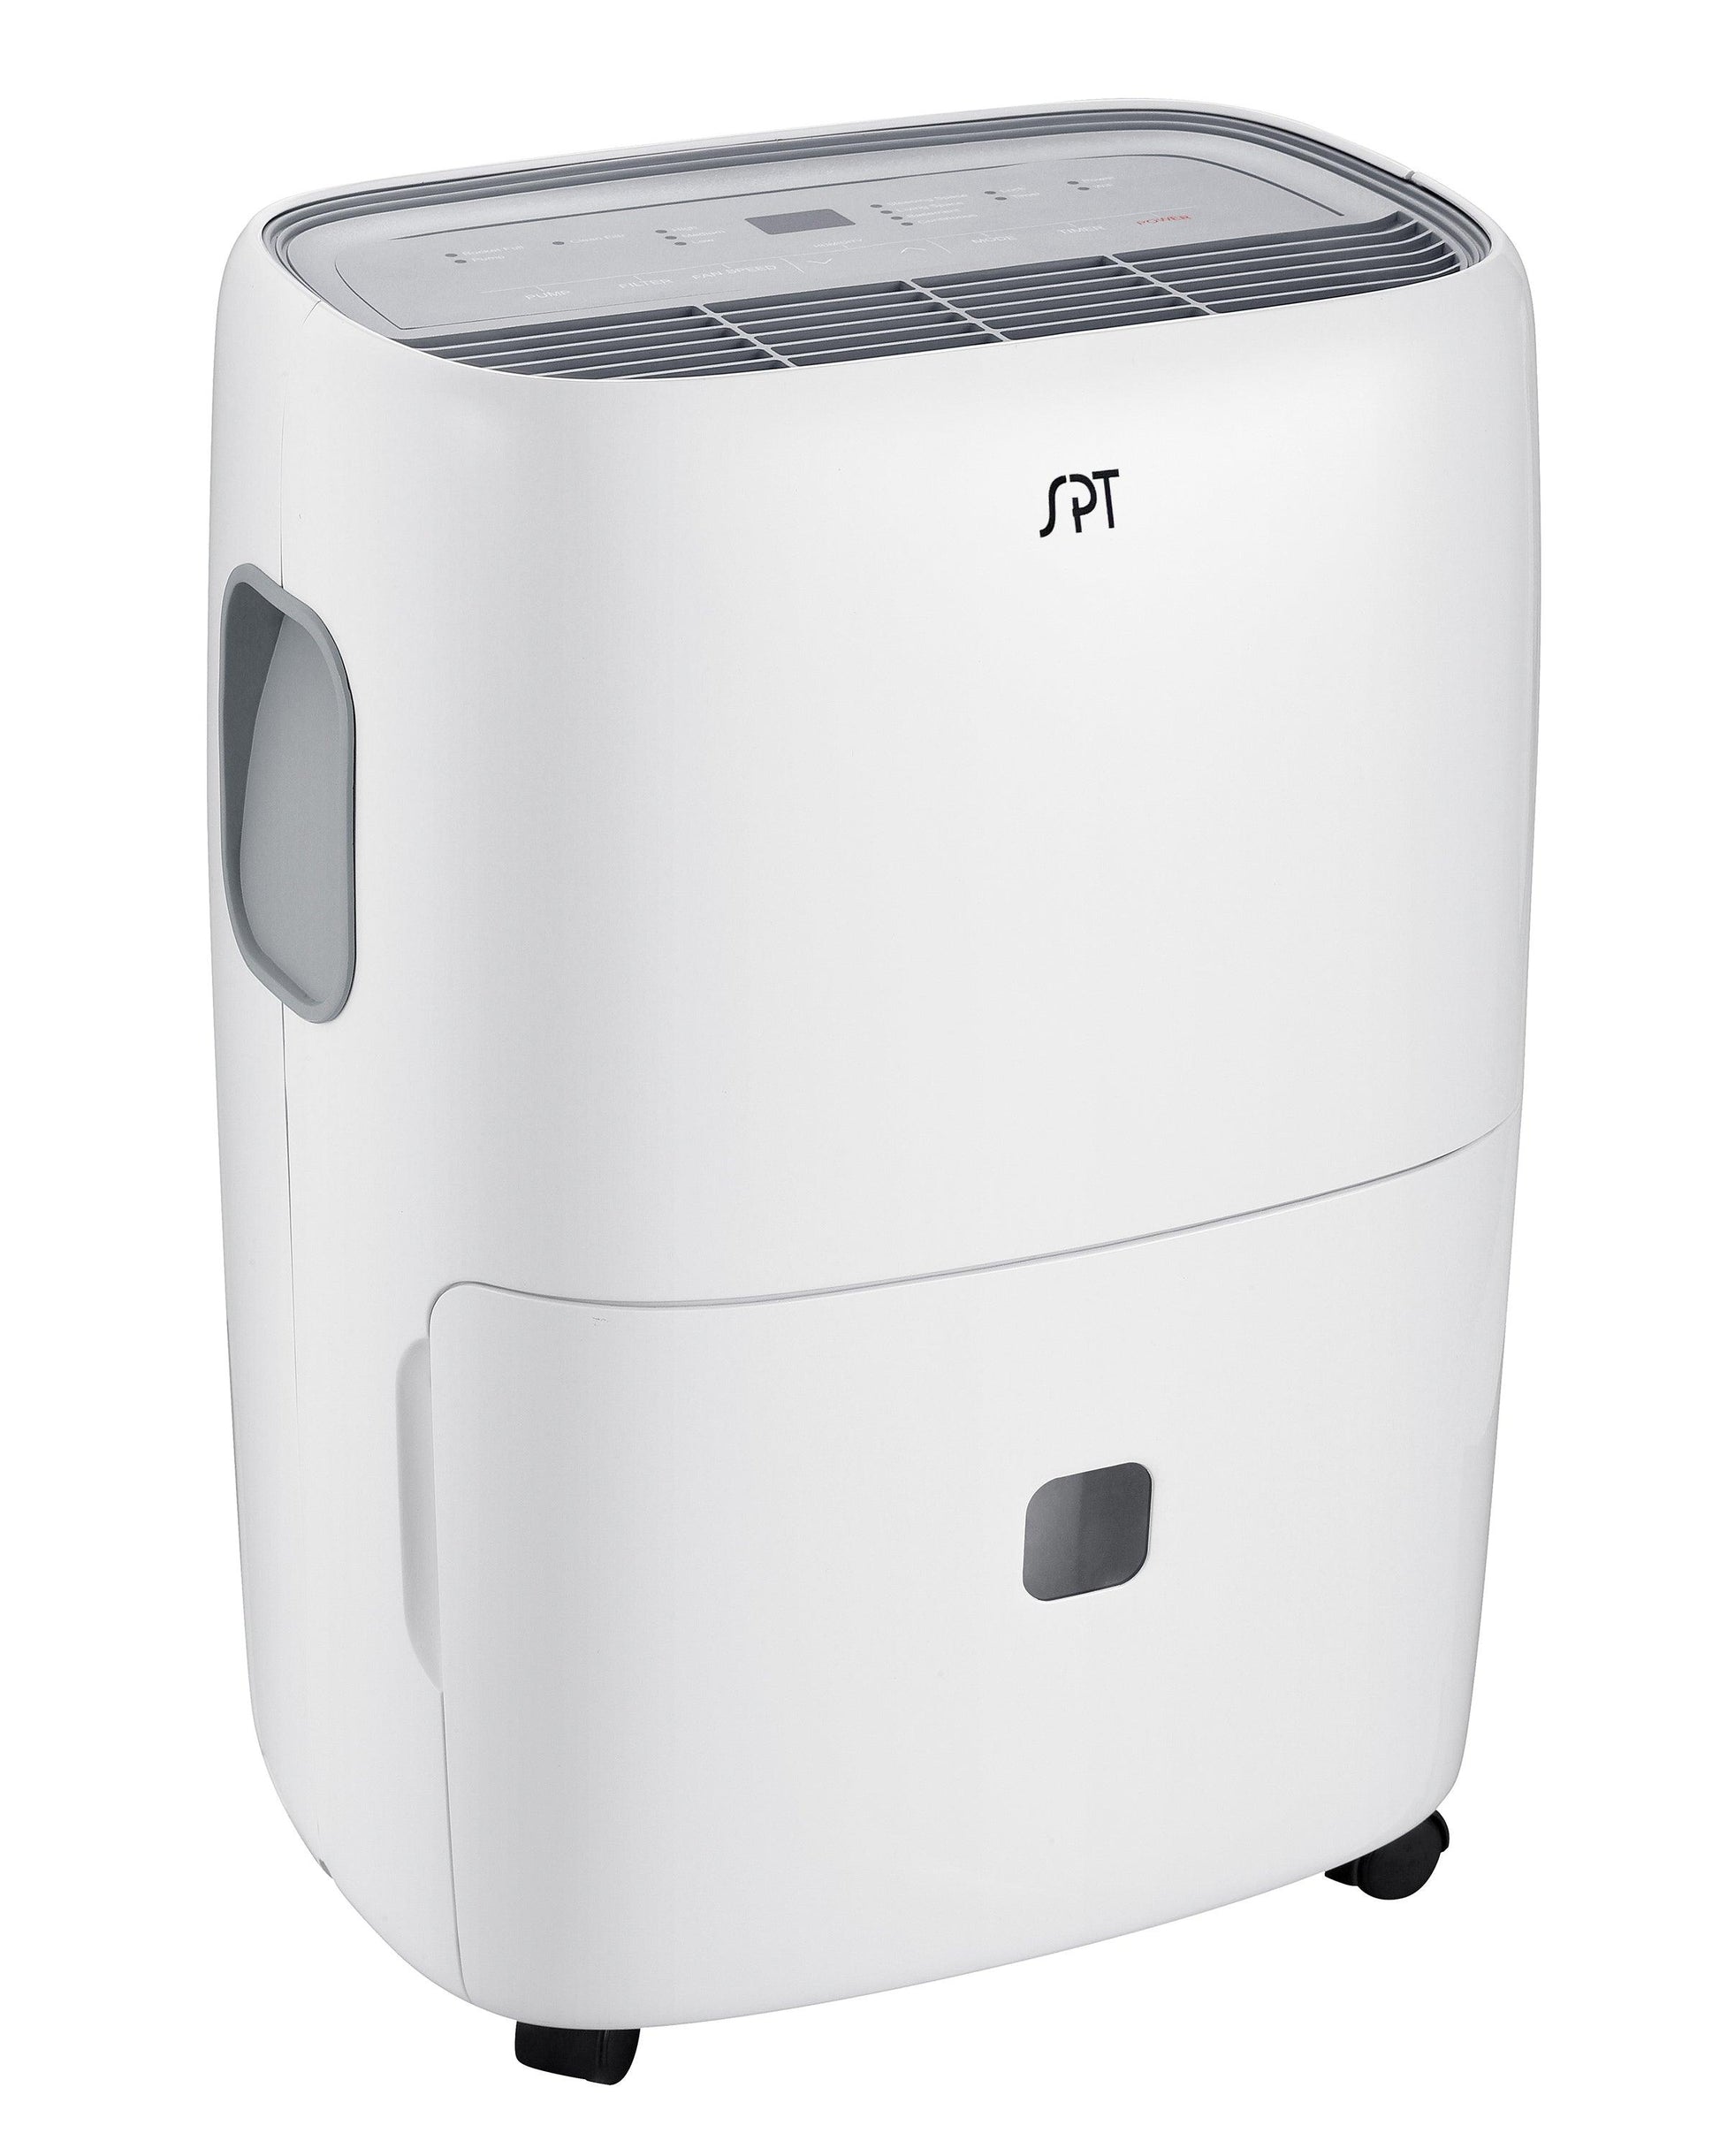 SPT 50-Pint ENERGY STAR Dehumidifier for Large Rooms SKU SD-53E - Elite Air Purifiers